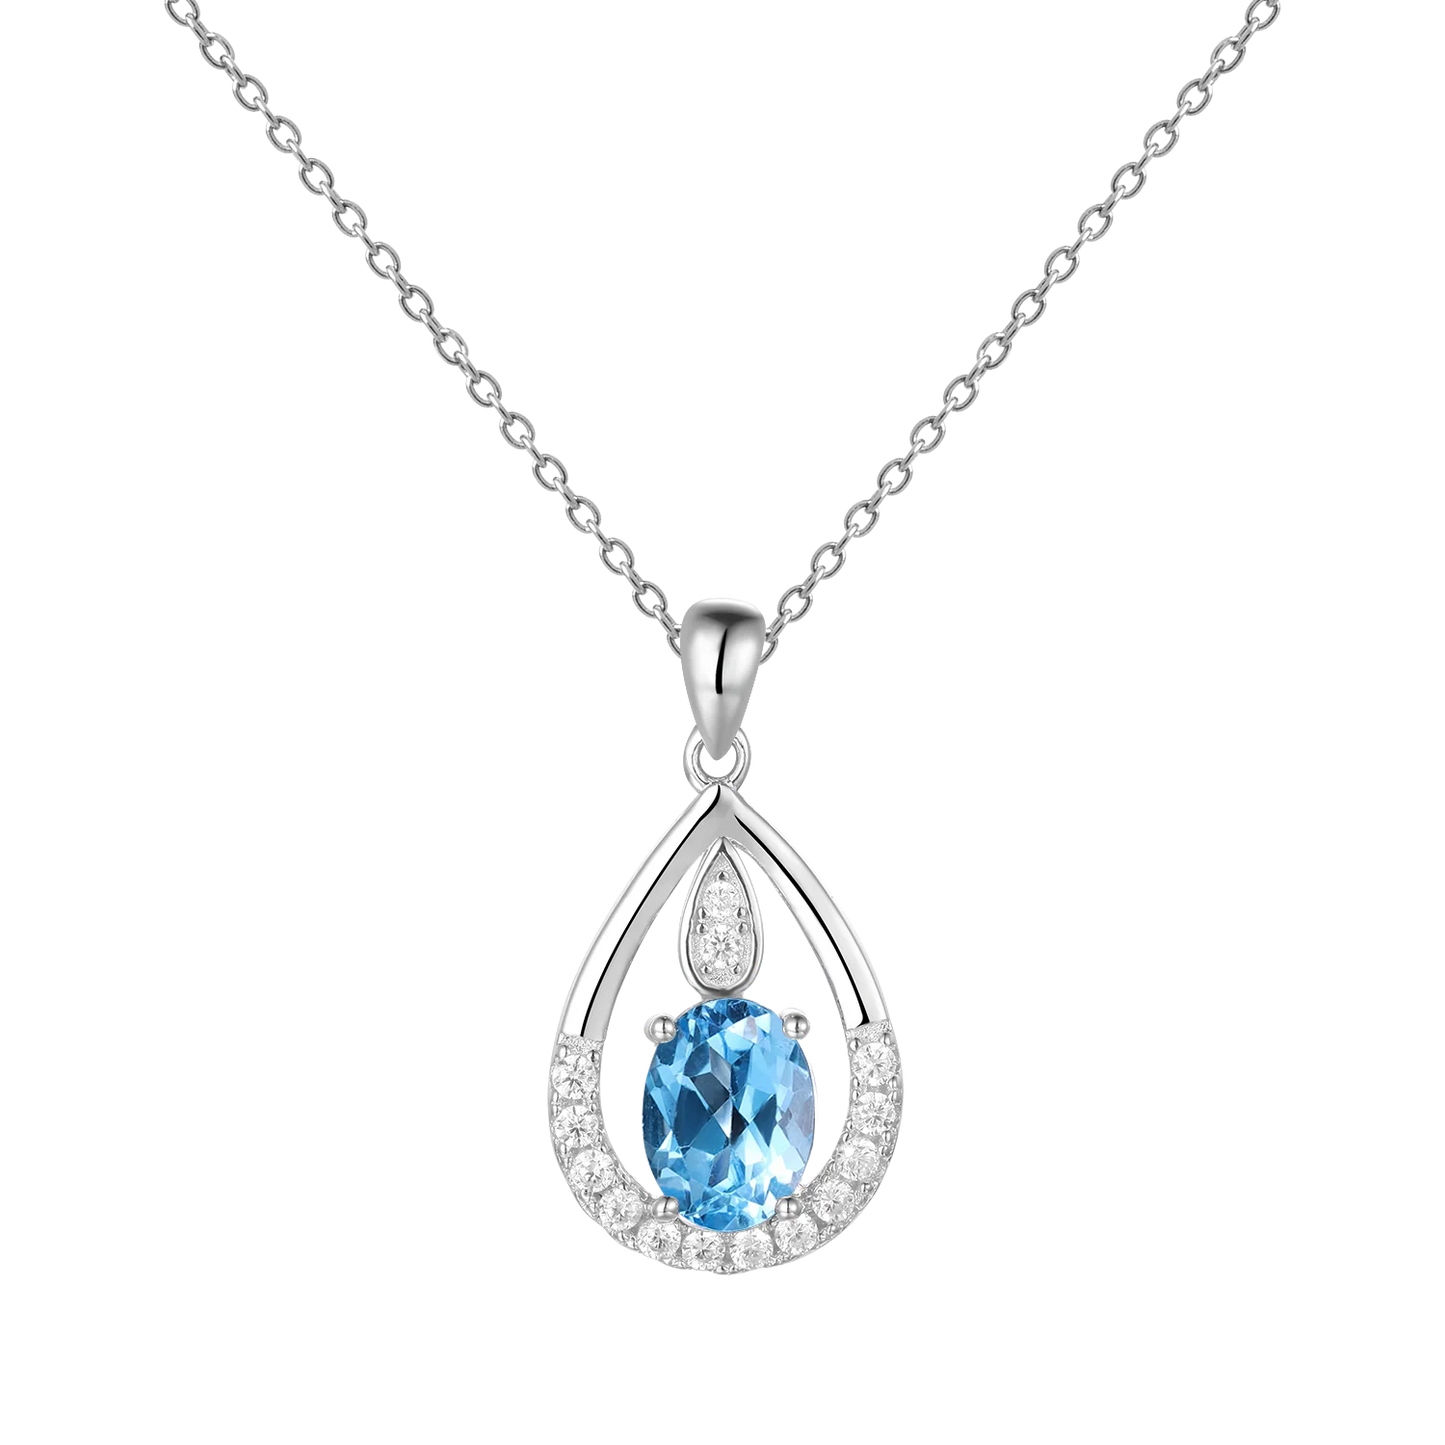 Gem's Ballet December Birthstone Topaz Necklace 6x8mm Oval Pink Topaz Pendant Necklace in 925 Sterling Silver with 18" Chain Swiss Blue Topaz